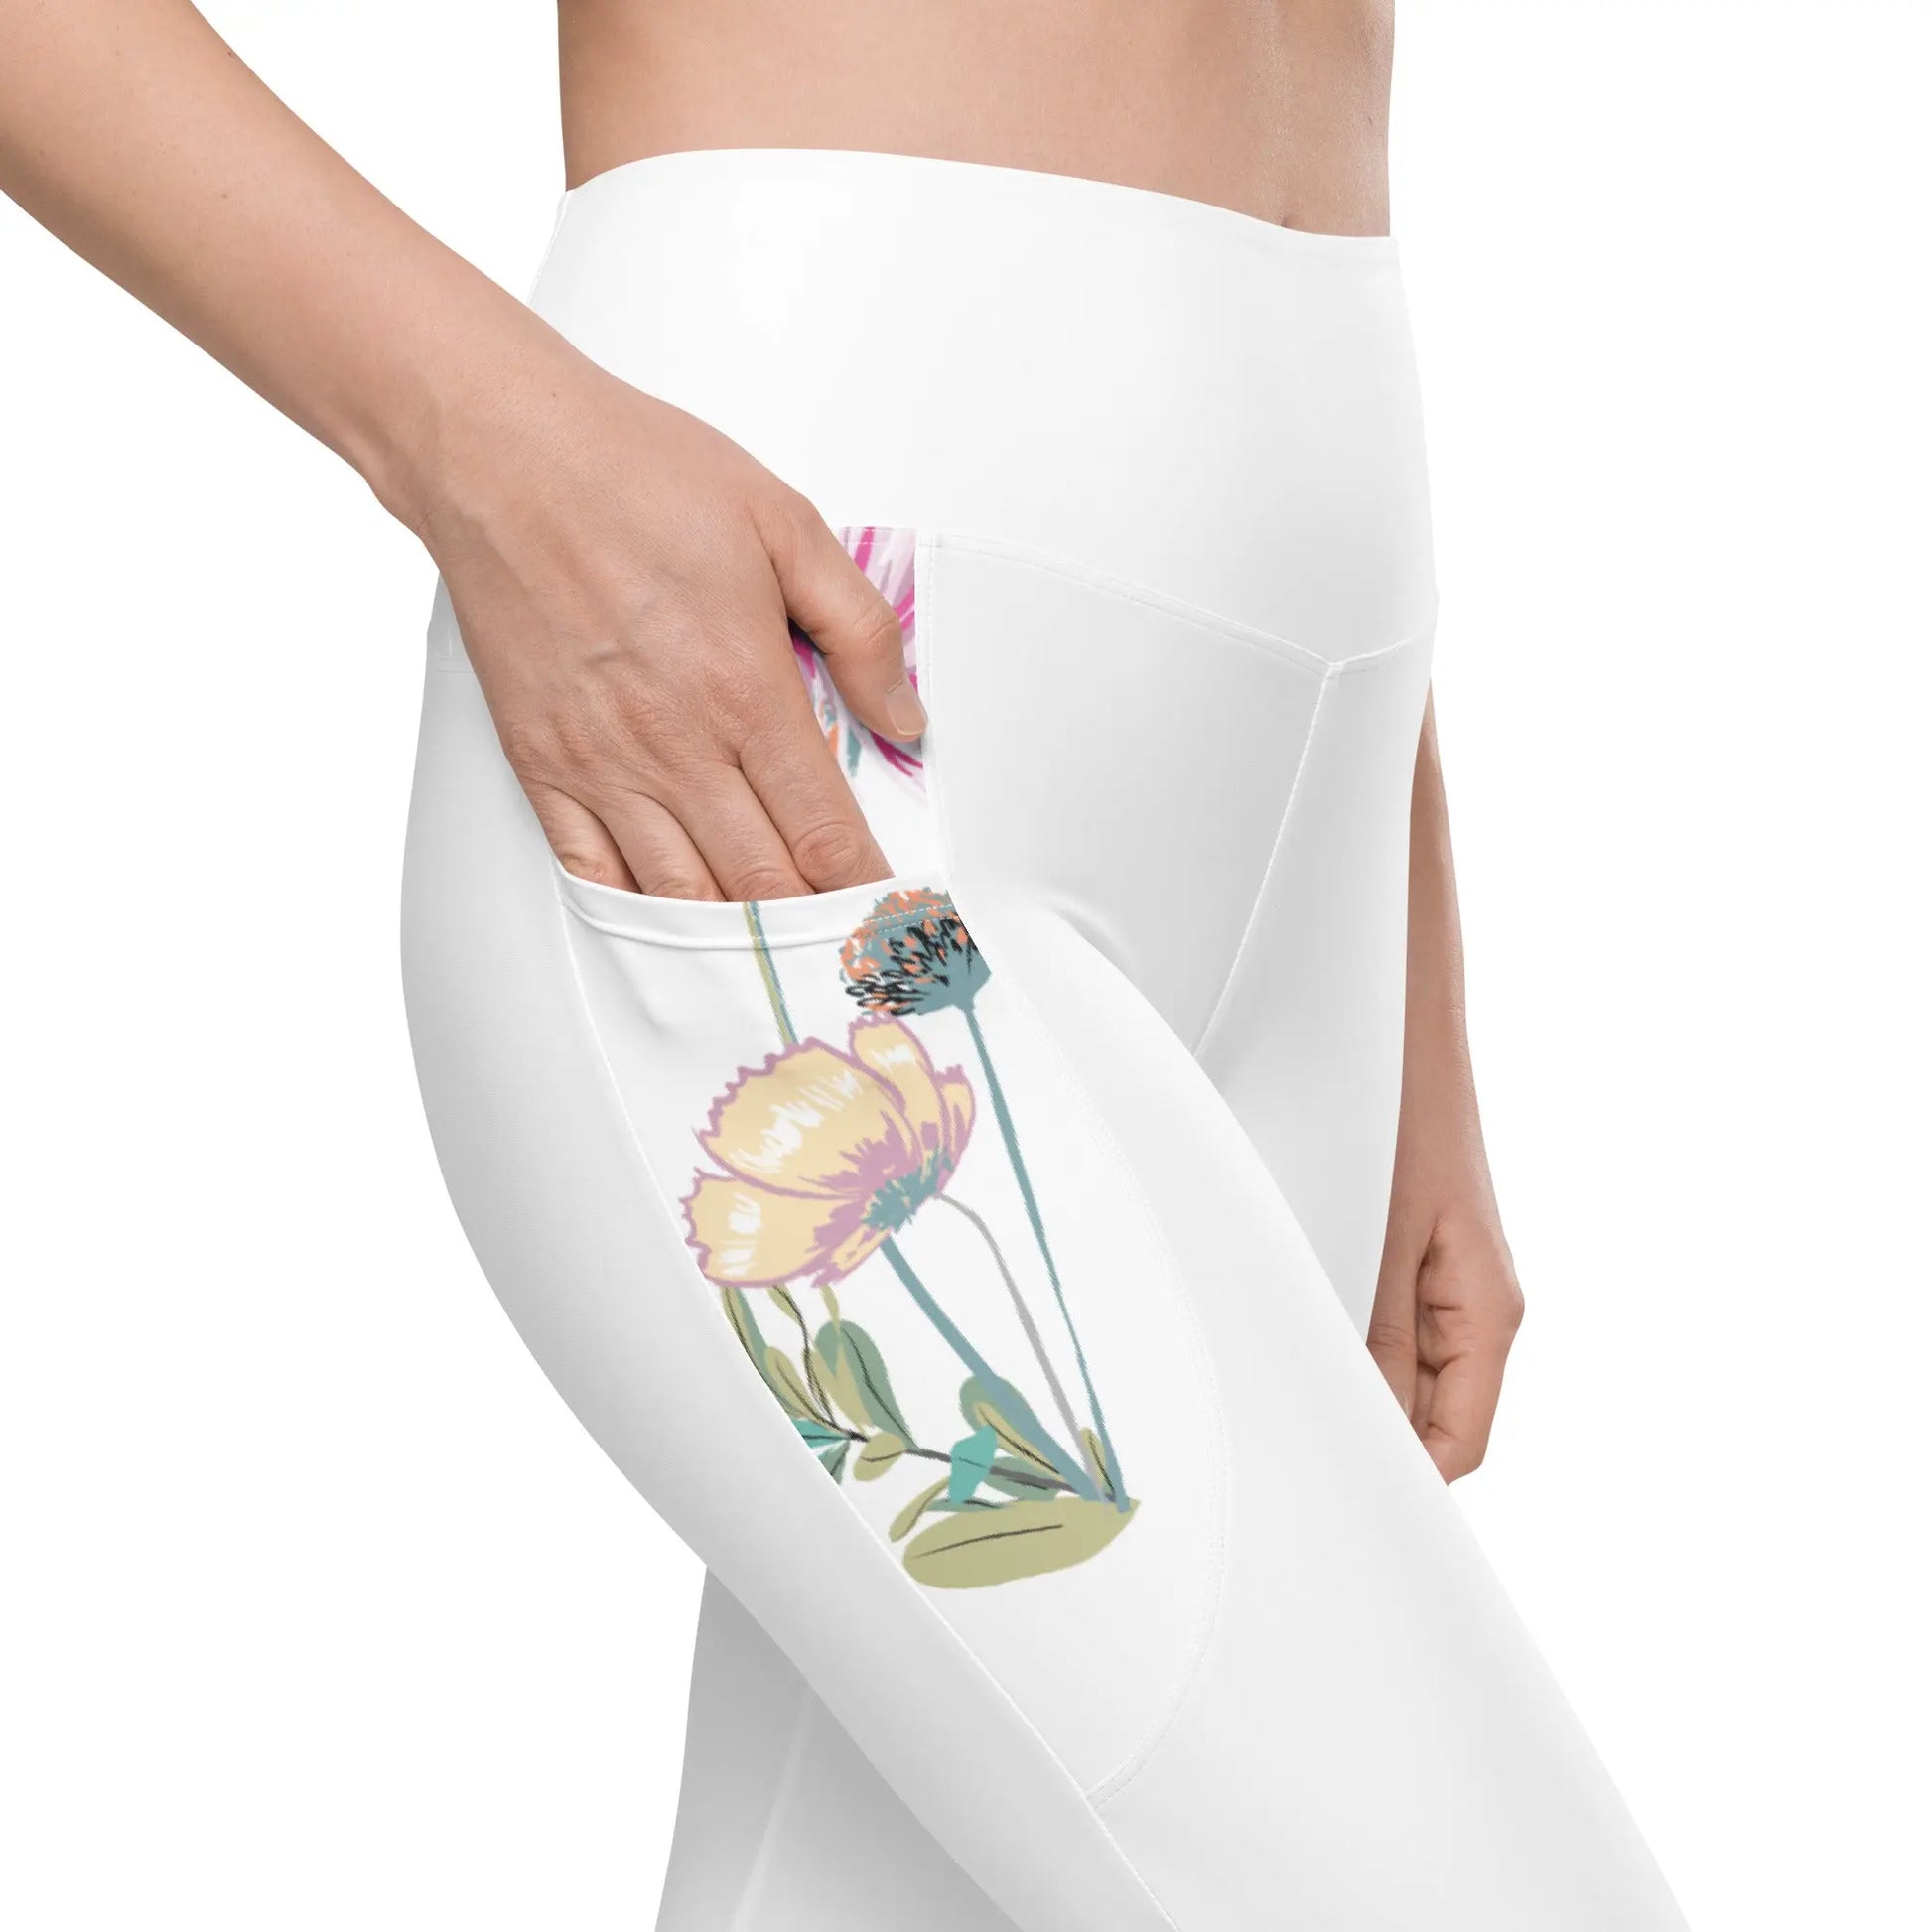 White Leggings with pockets and Floral Details Ellie Day Activewear